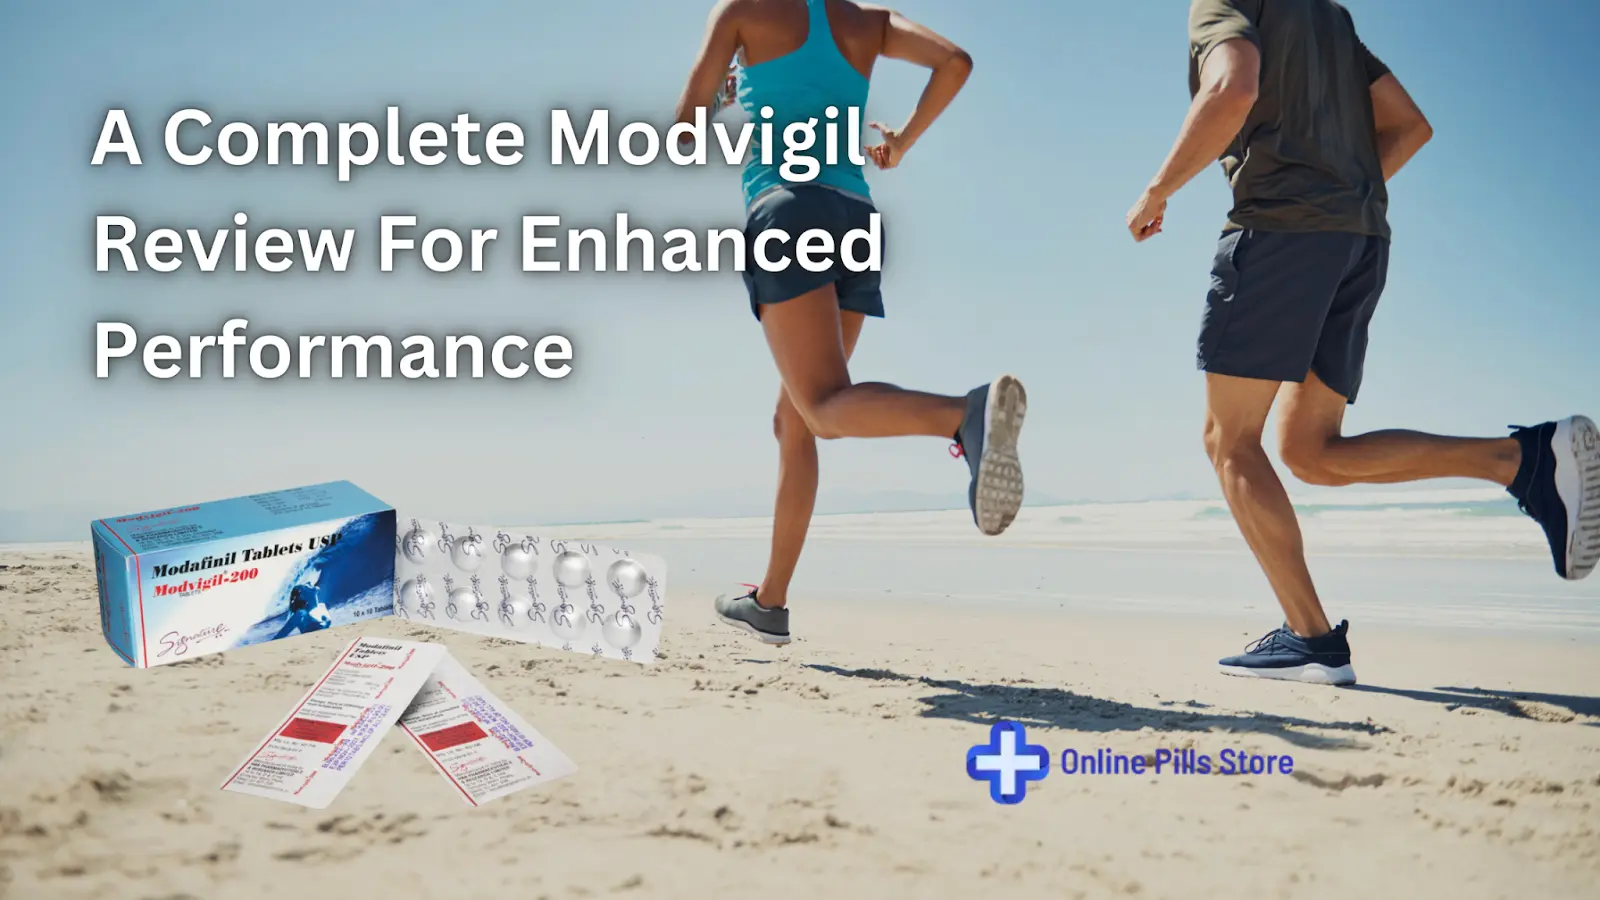 A Complete Modvigil Review For Enhanced Performance